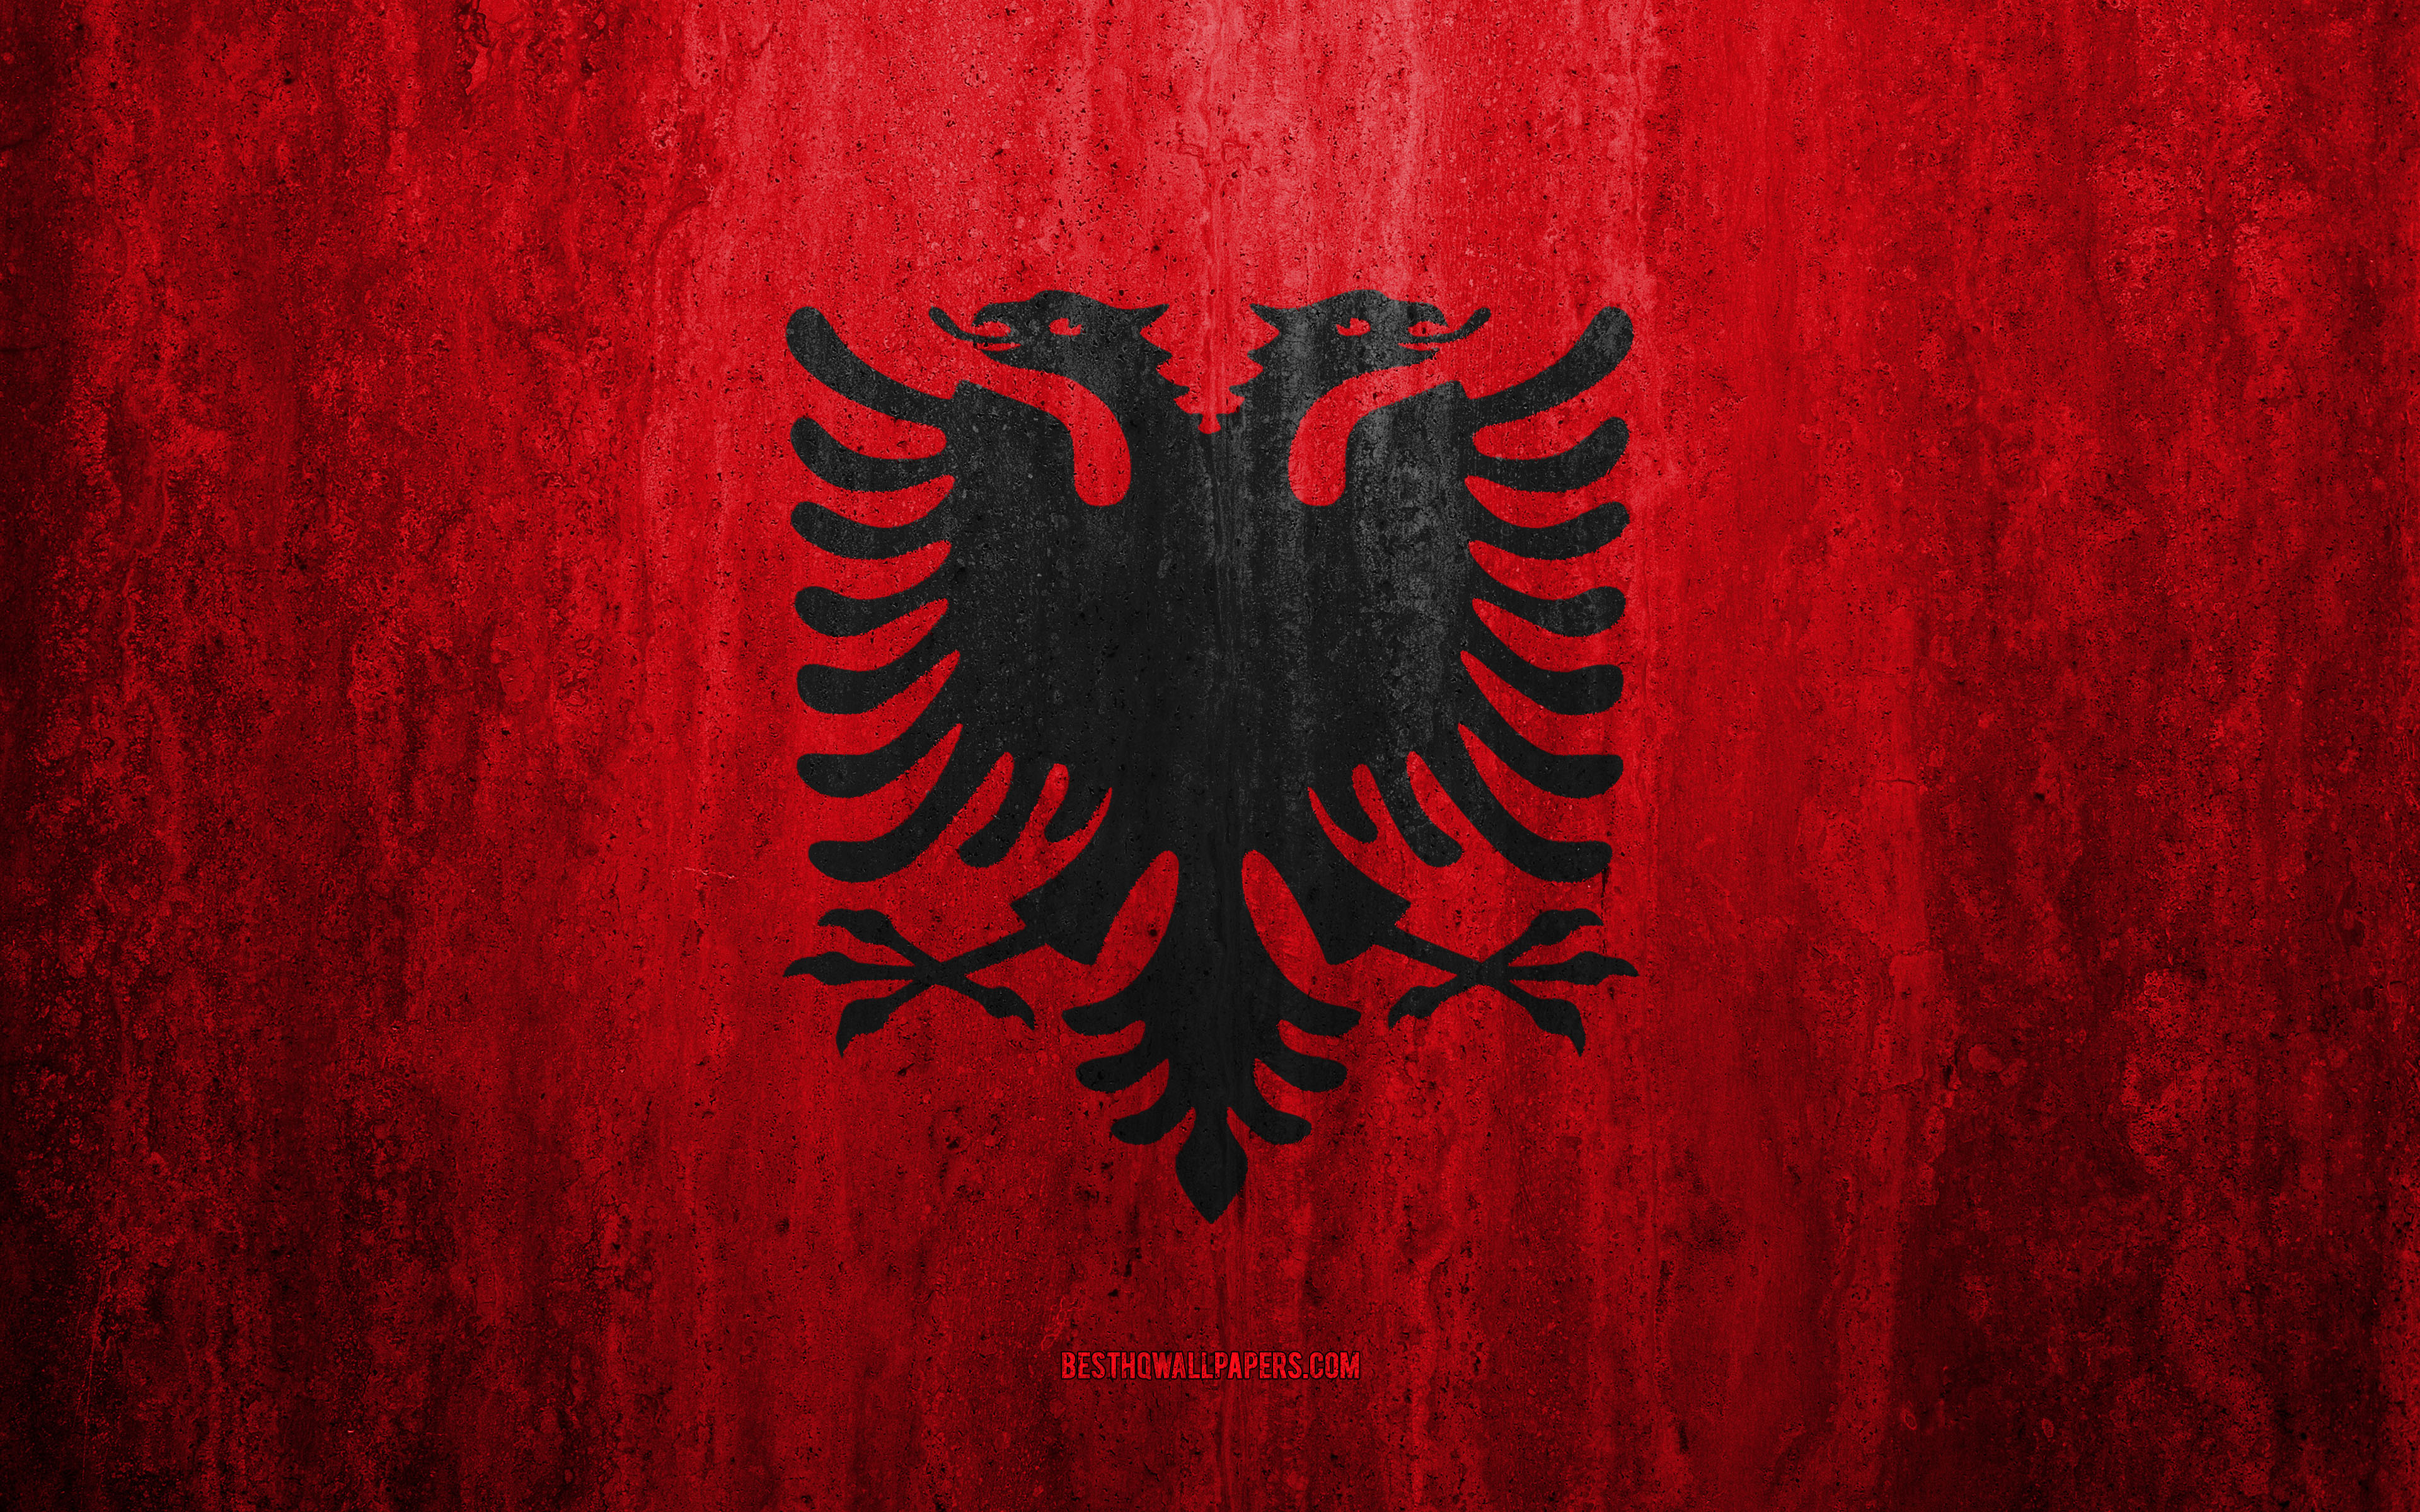 Download wallpaper Flag of Albania, 4k, stone background, grunge flag, Europe, Albania flag, grunge art, national symbols, Albania, stone texture for desktop with resolution 3840x2400. High Quality HD picture wallpaper